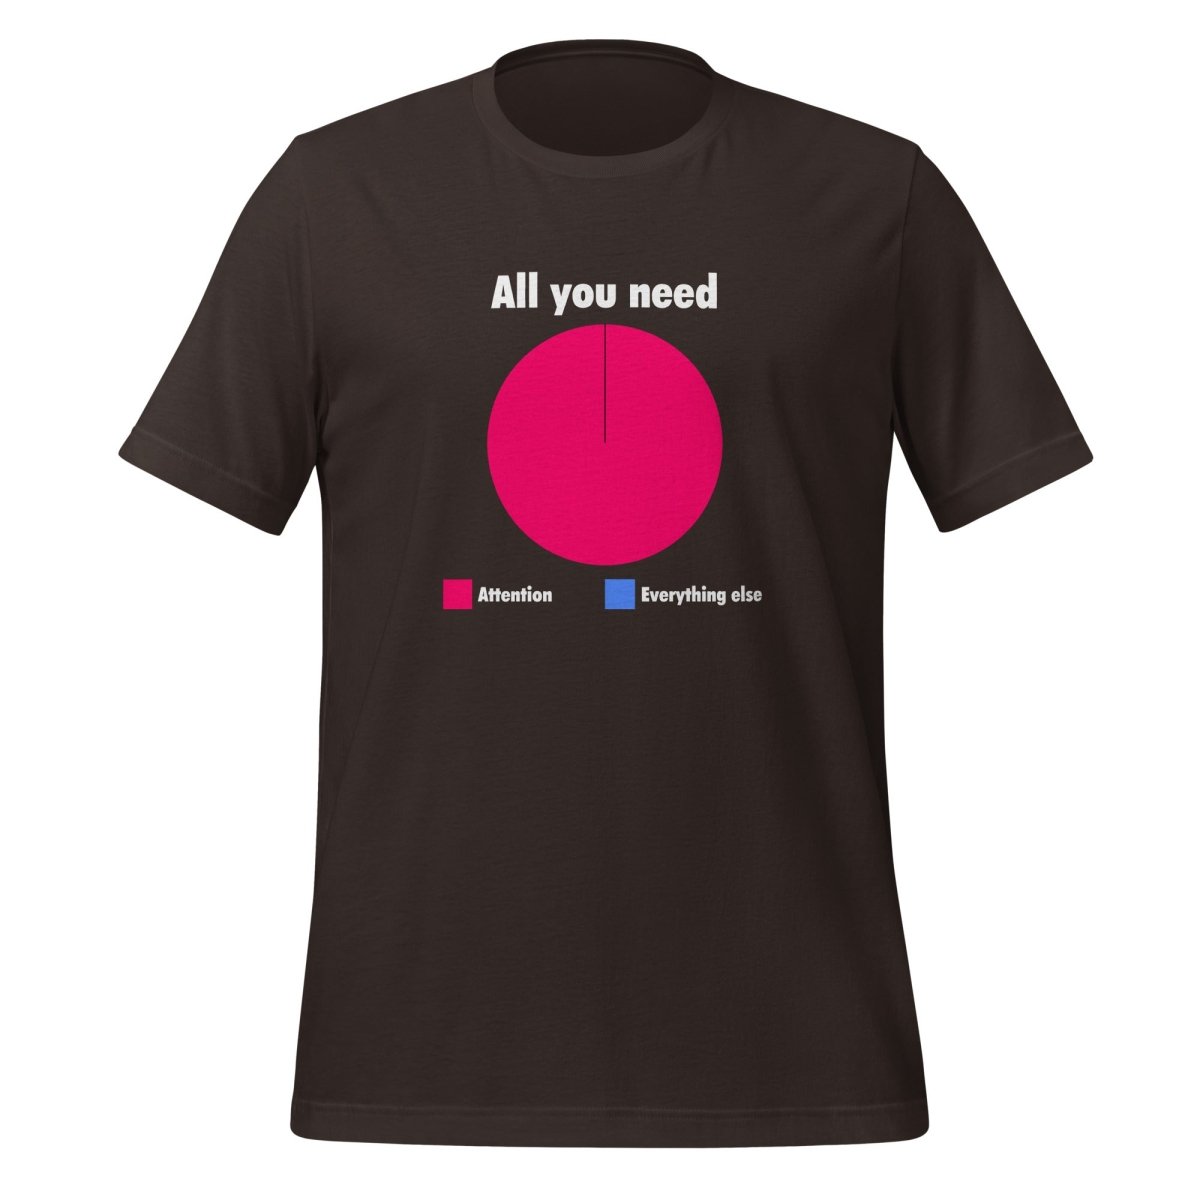 All You Need is Attention Pie Chart T - Shirt (unisex) - Brown - AI Store